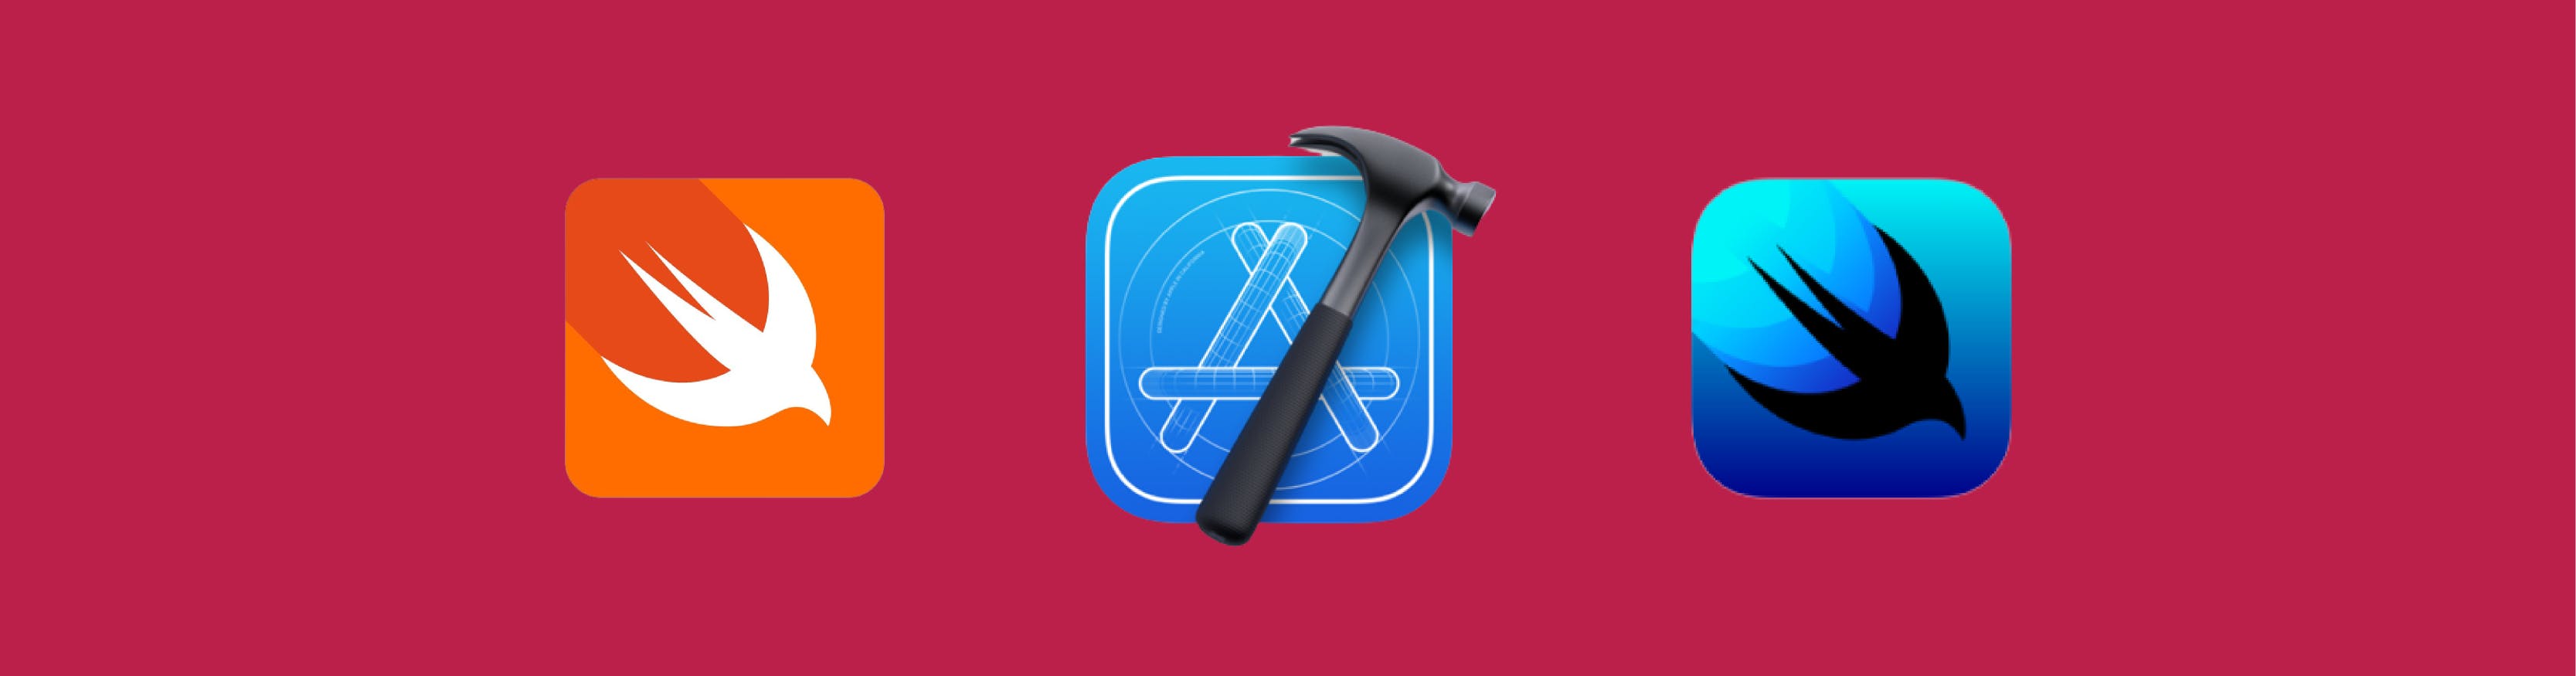 2 iOS related logos-01.png